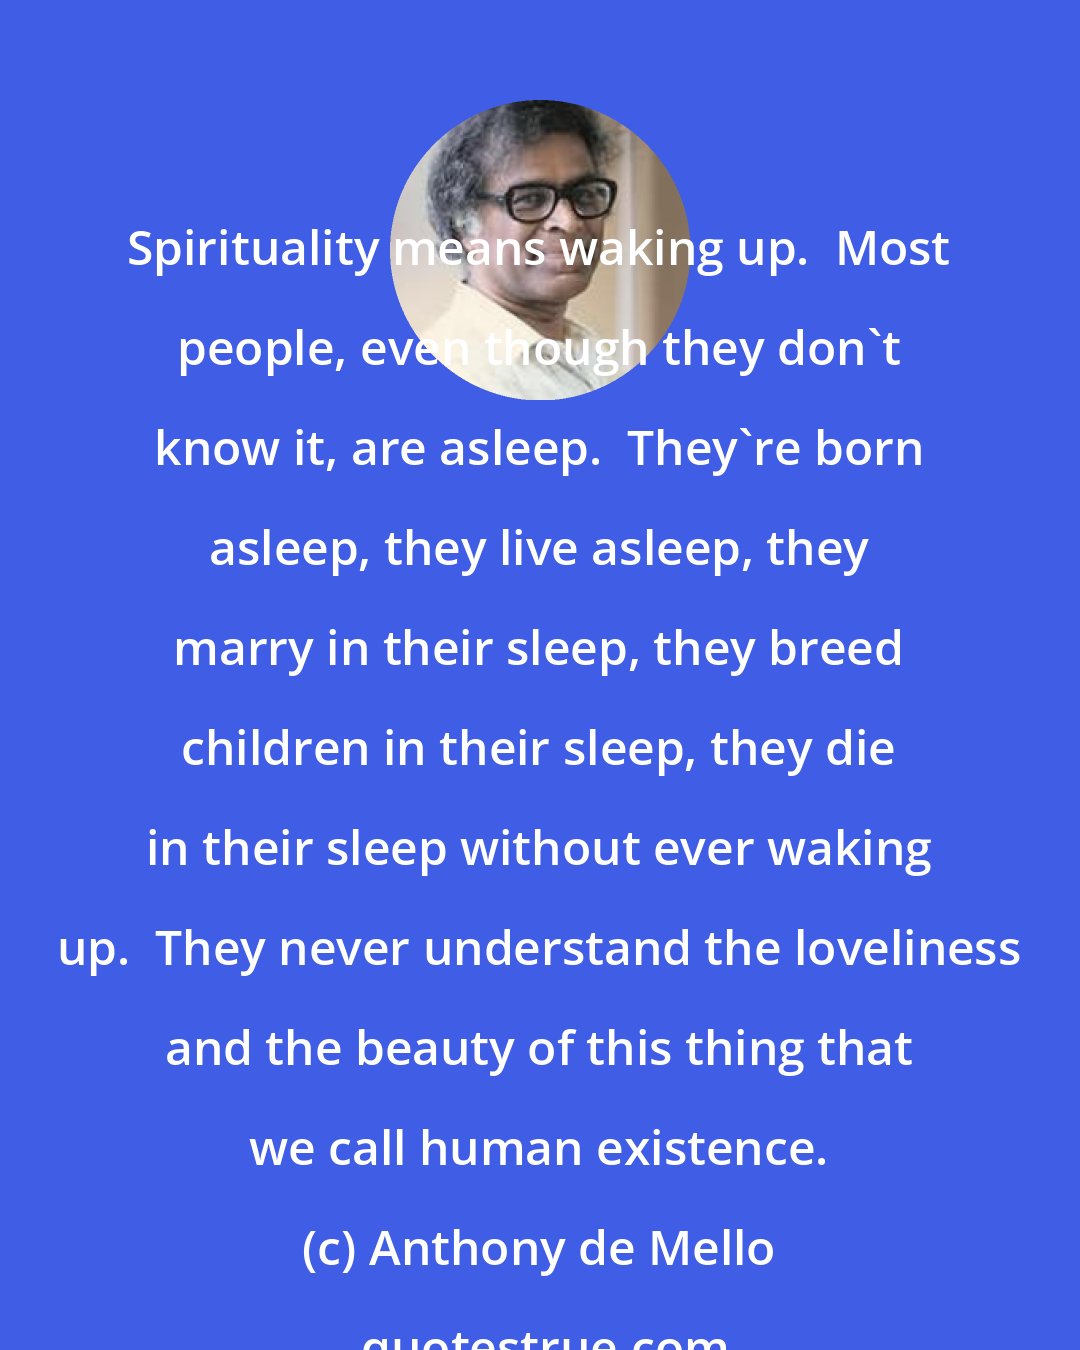 Anthony de Mello: Spirituality means waking up.  Most people, even though they don't know it, are asleep.  They're born asleep, they live asleep, they marry in their sleep, they breed children in their sleep, they die in their sleep without ever waking up.  They never understand the loveliness and the beauty of this thing that we call human existence.